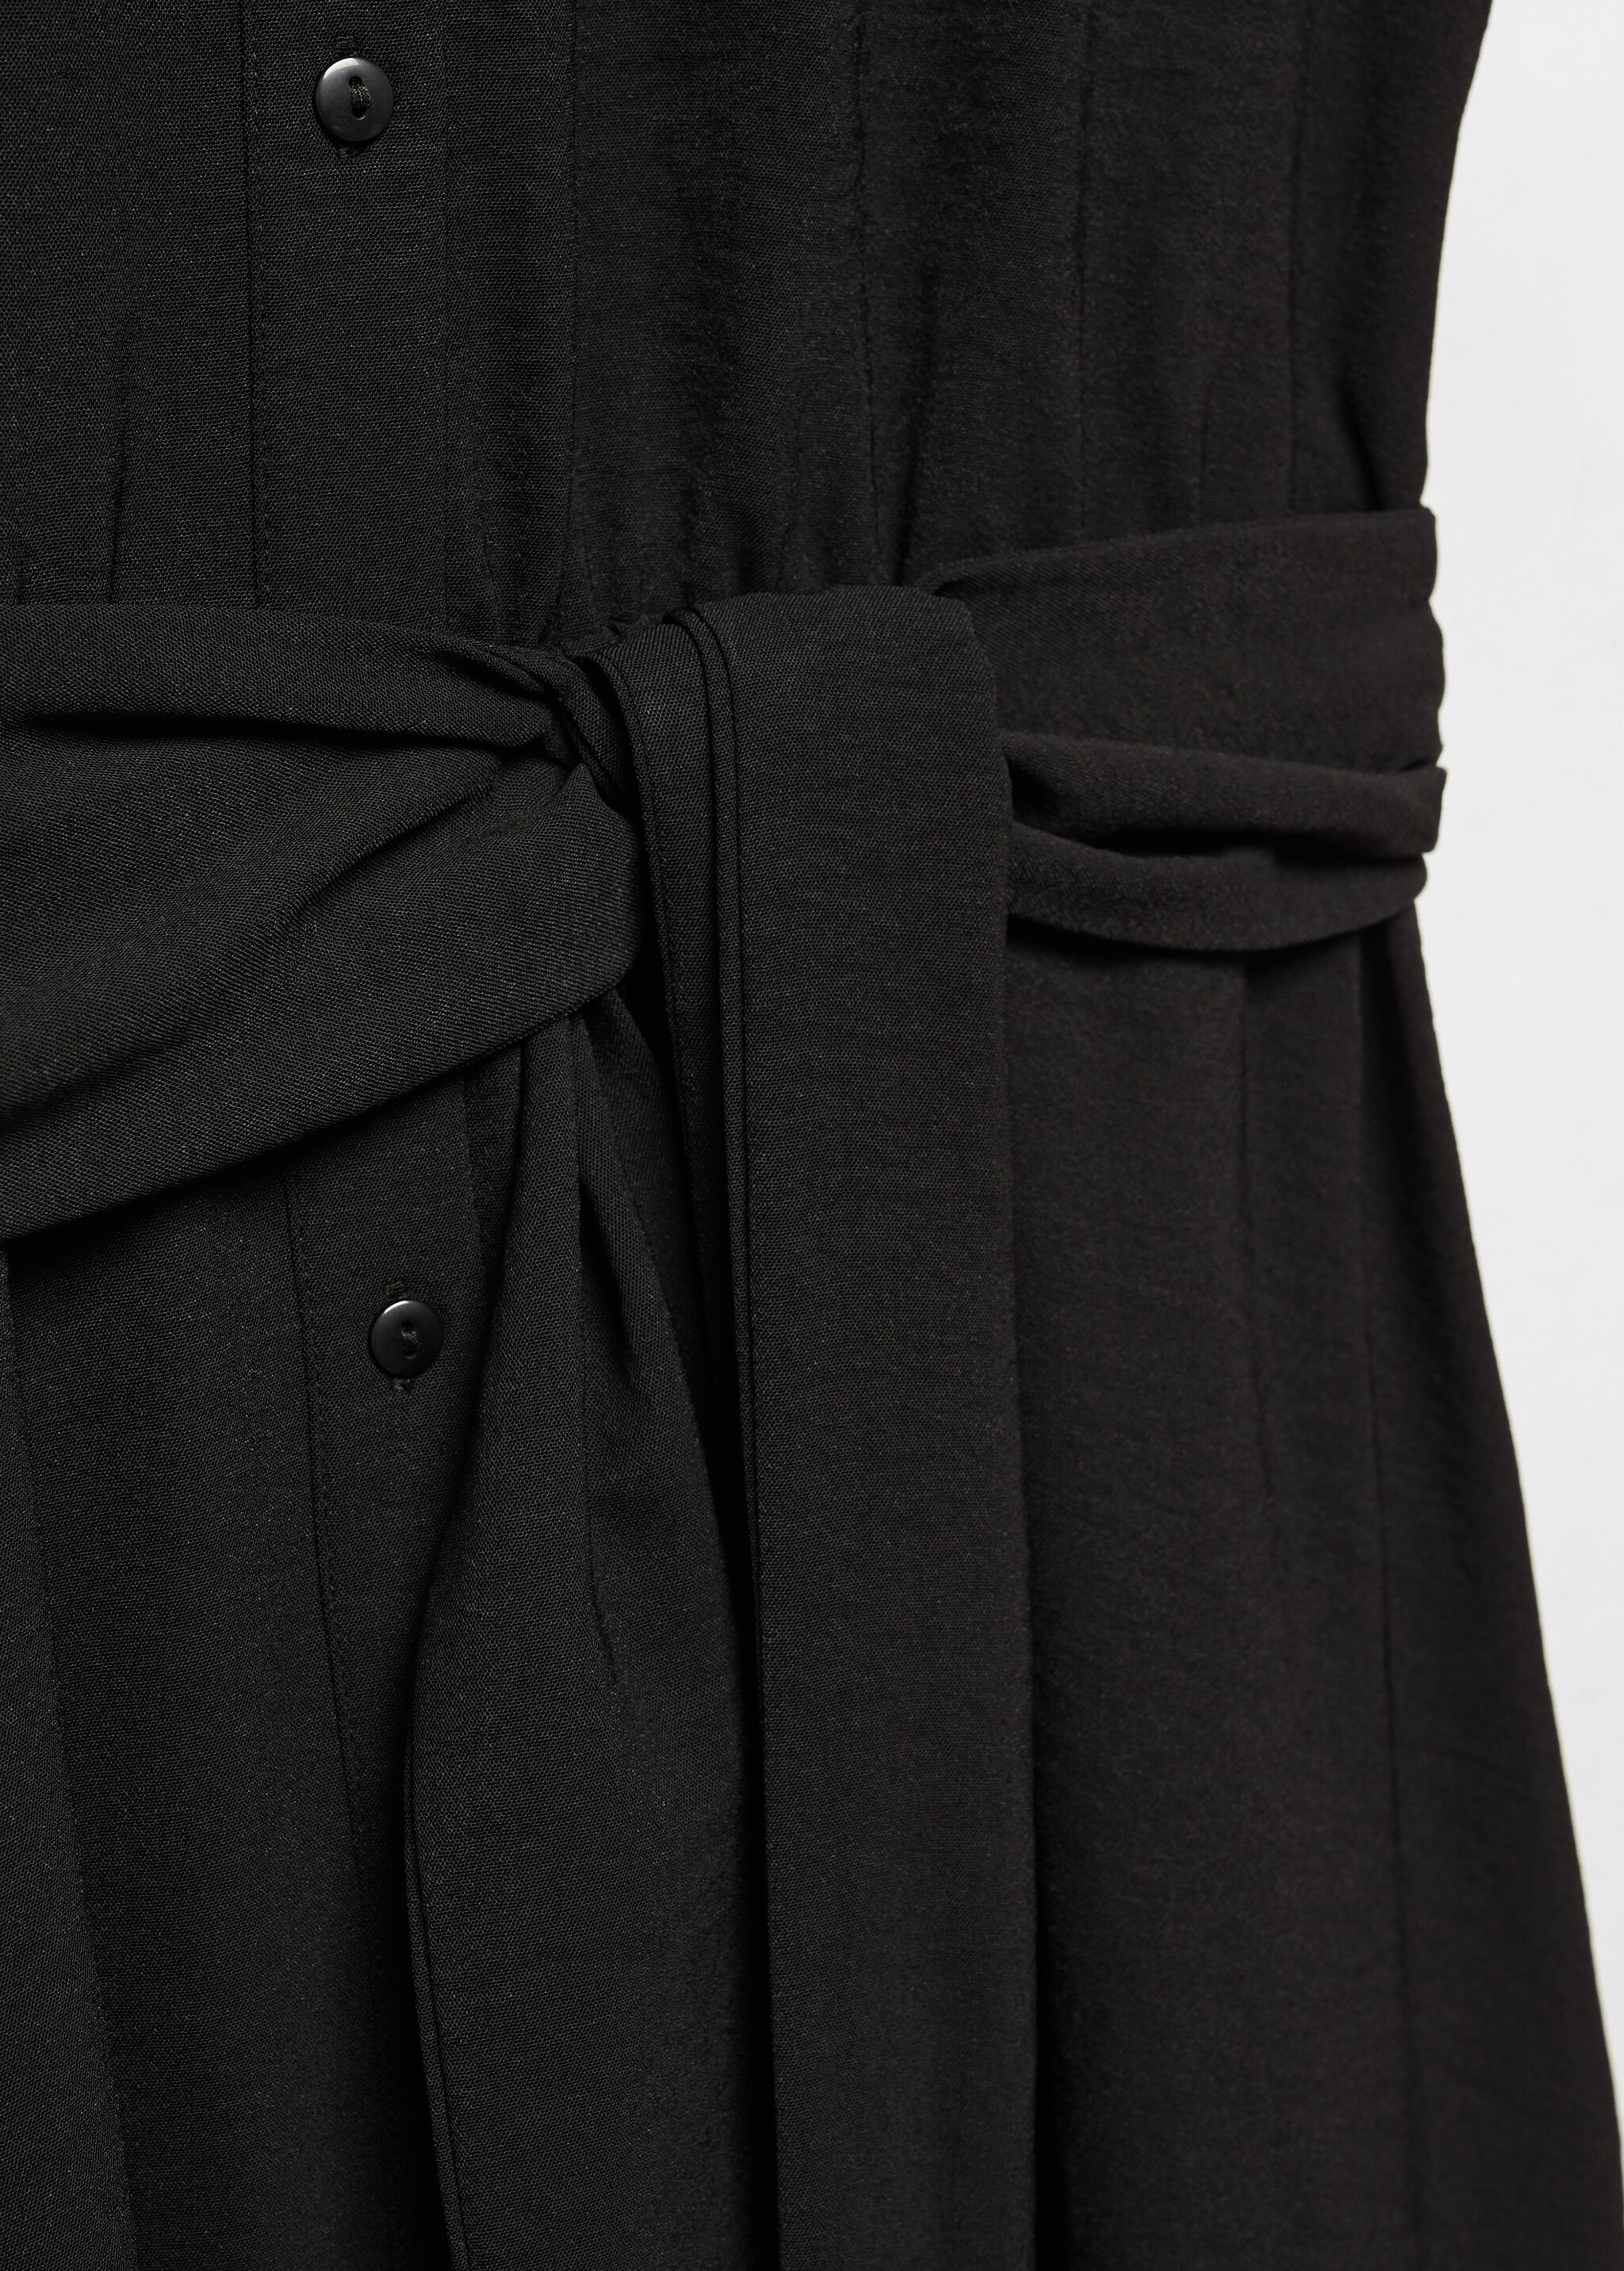 Midi shirt dress - Details of the article 8